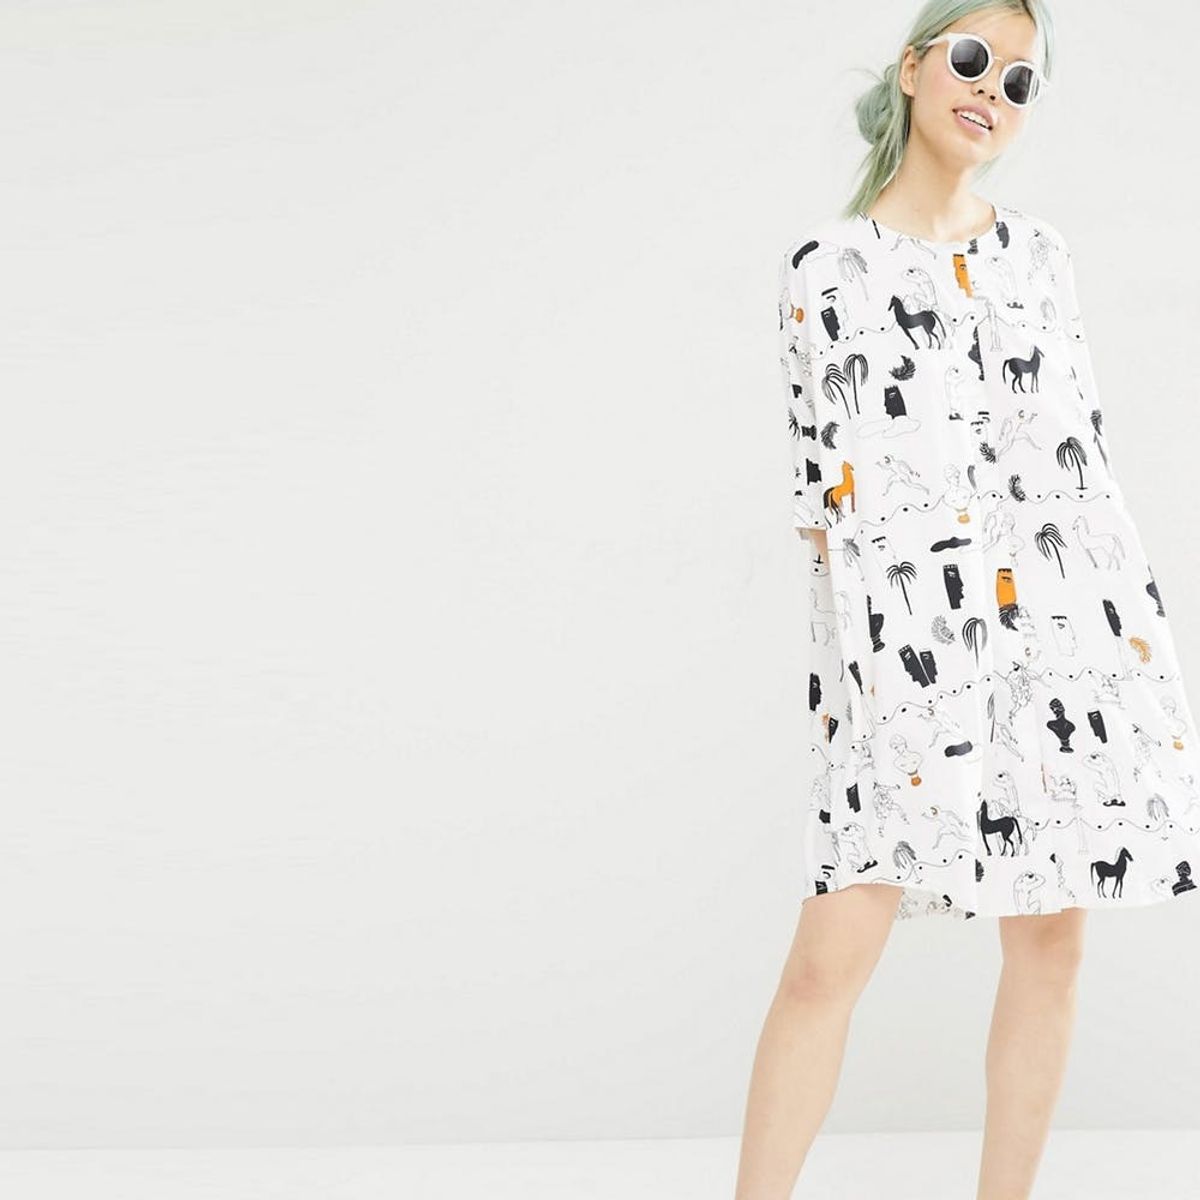 19 Shirt Dresses That Slay for Work and Play